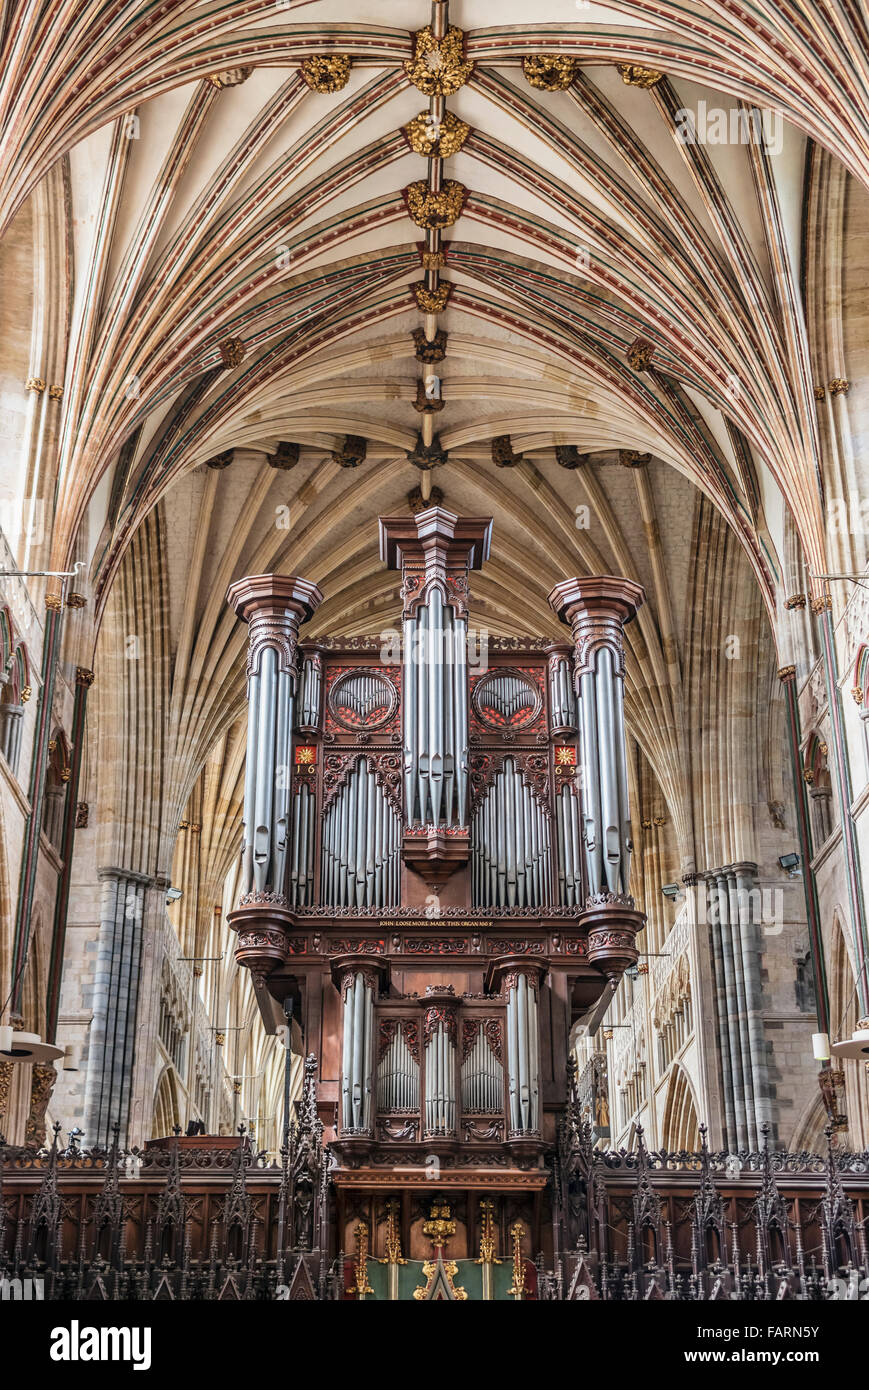 Pipe organ inside the Exeter Cathedral, Devon, England, UK Stock Photo